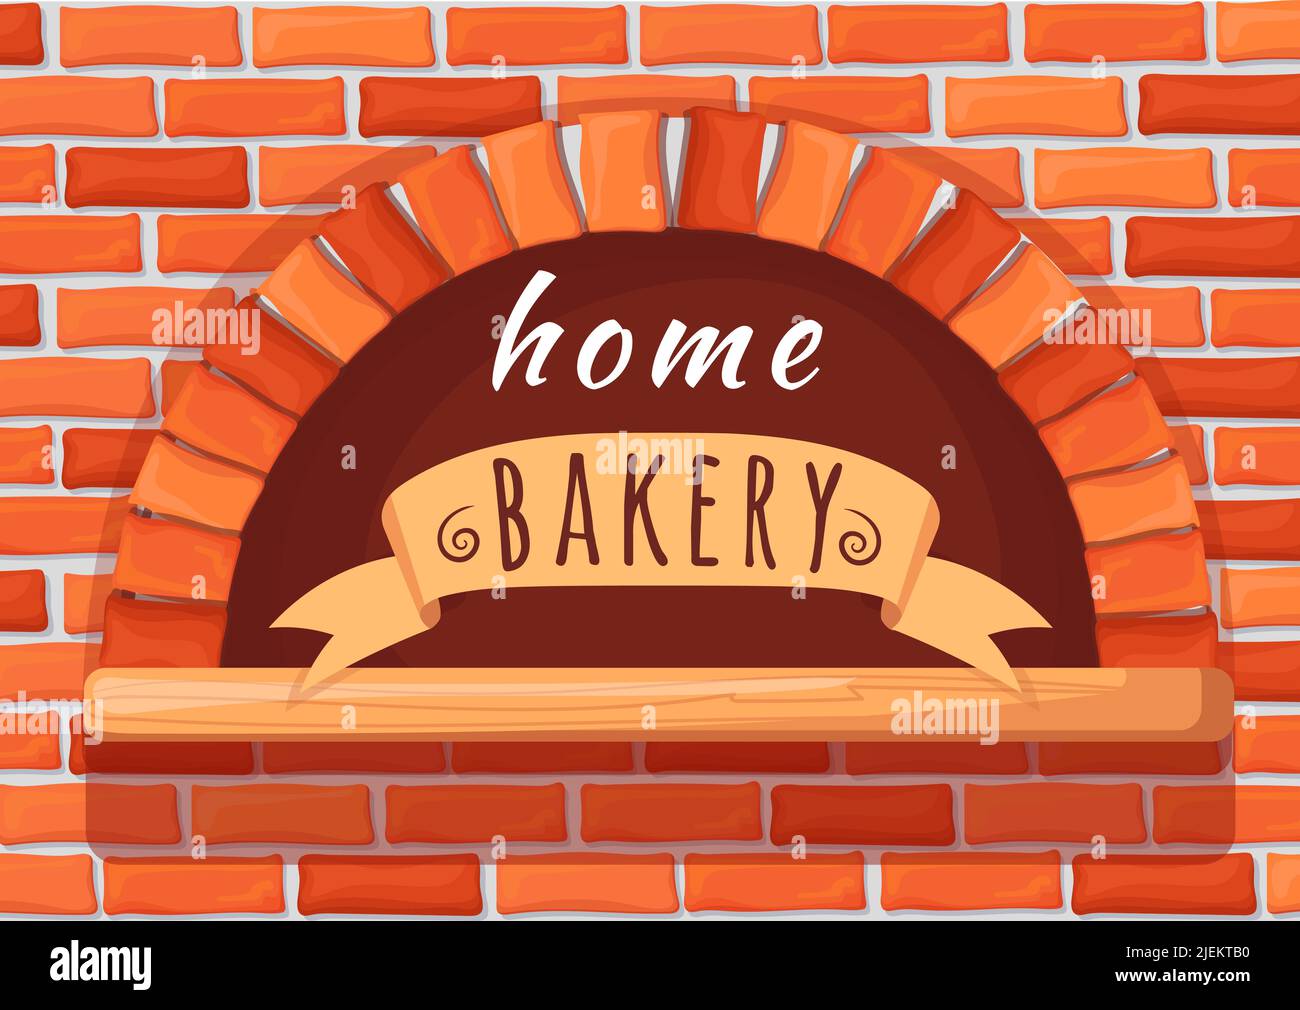 Home bakery oven. Brick stone firewood stove for baking bread, cooking italian pizza cheese on fire wood, creative logo restaurant furnace baker fireplace, neat vector illustration of oven traditional Stock Vector